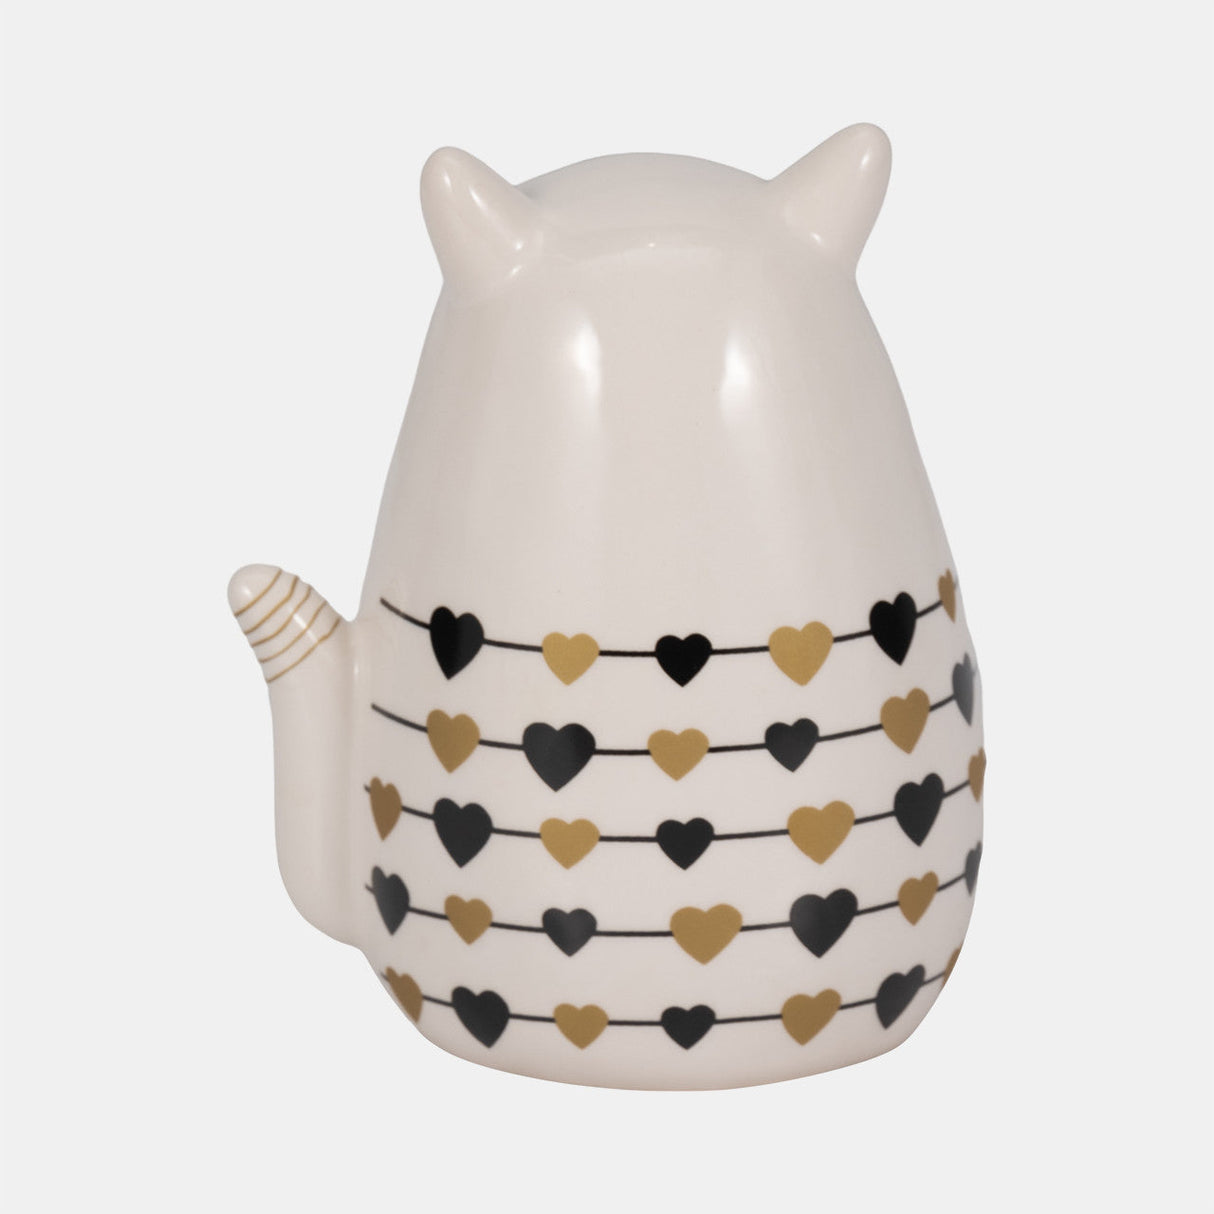 6" Black And Gold Hearts Kitty, White